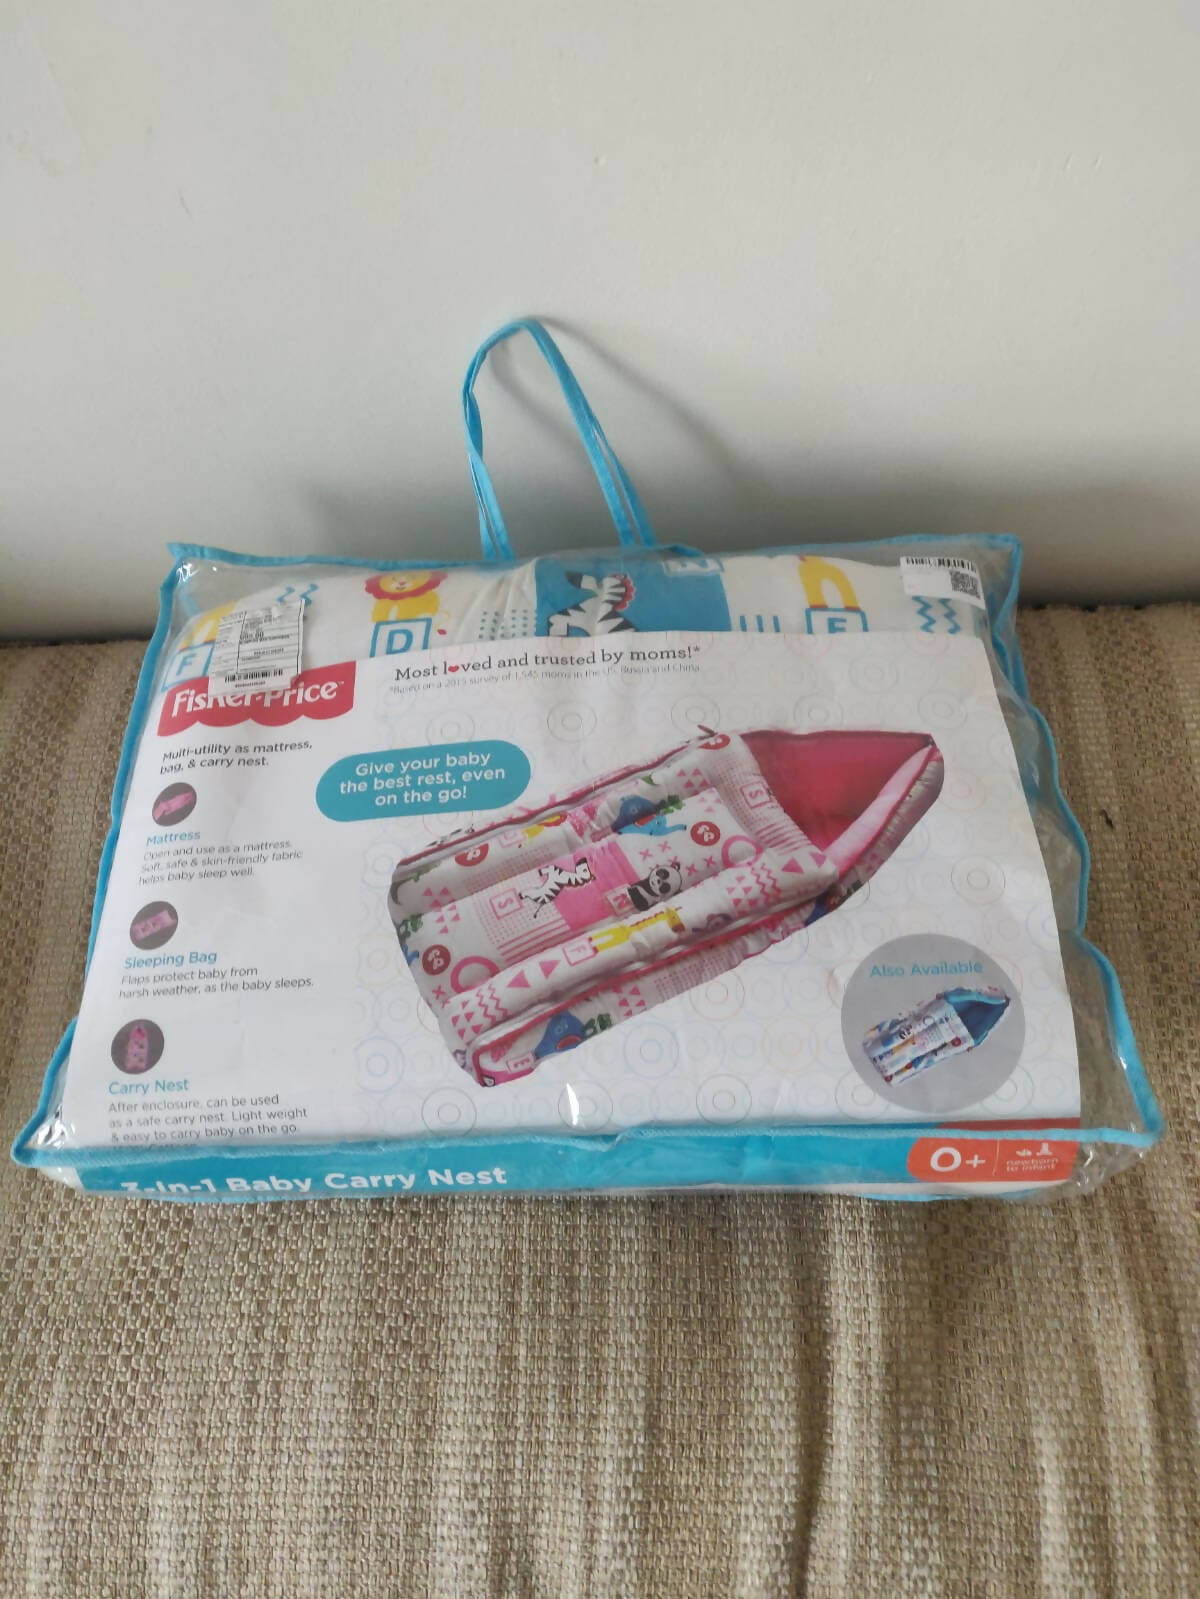 FISHER PRICE Baby 3 in 1 Baby Bed cum Carrier Nest - PyaraBaby